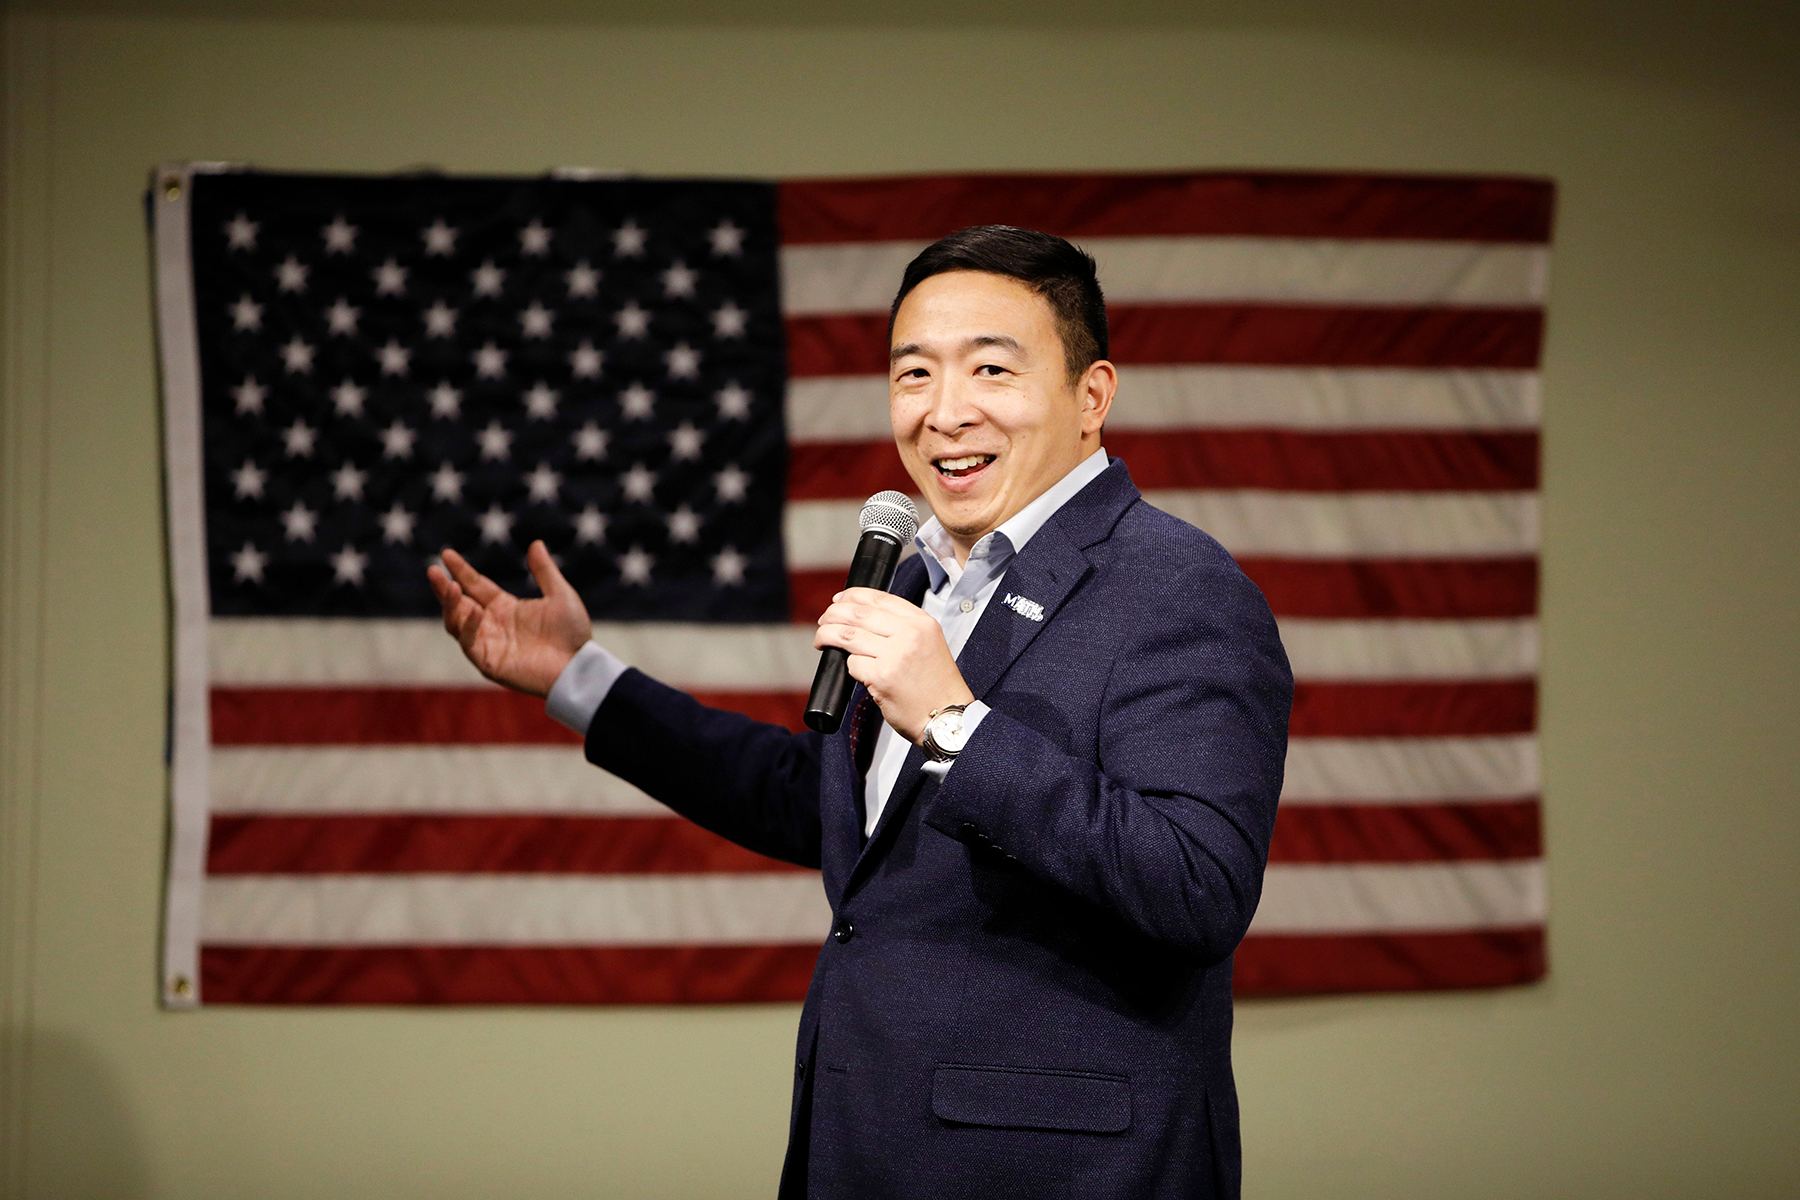 Mandatory Credit: Photo by John Locher/AP/Shutterstock (10532388f)
Democratic presidential candidate entrepreneur Andrew Yang speaks at the Charles H. MacNider Art Museum during a campaign event, in Mason City, Iowa
Election 2020 Andrew Yang, Mason City, USA - 21 Jan 2020